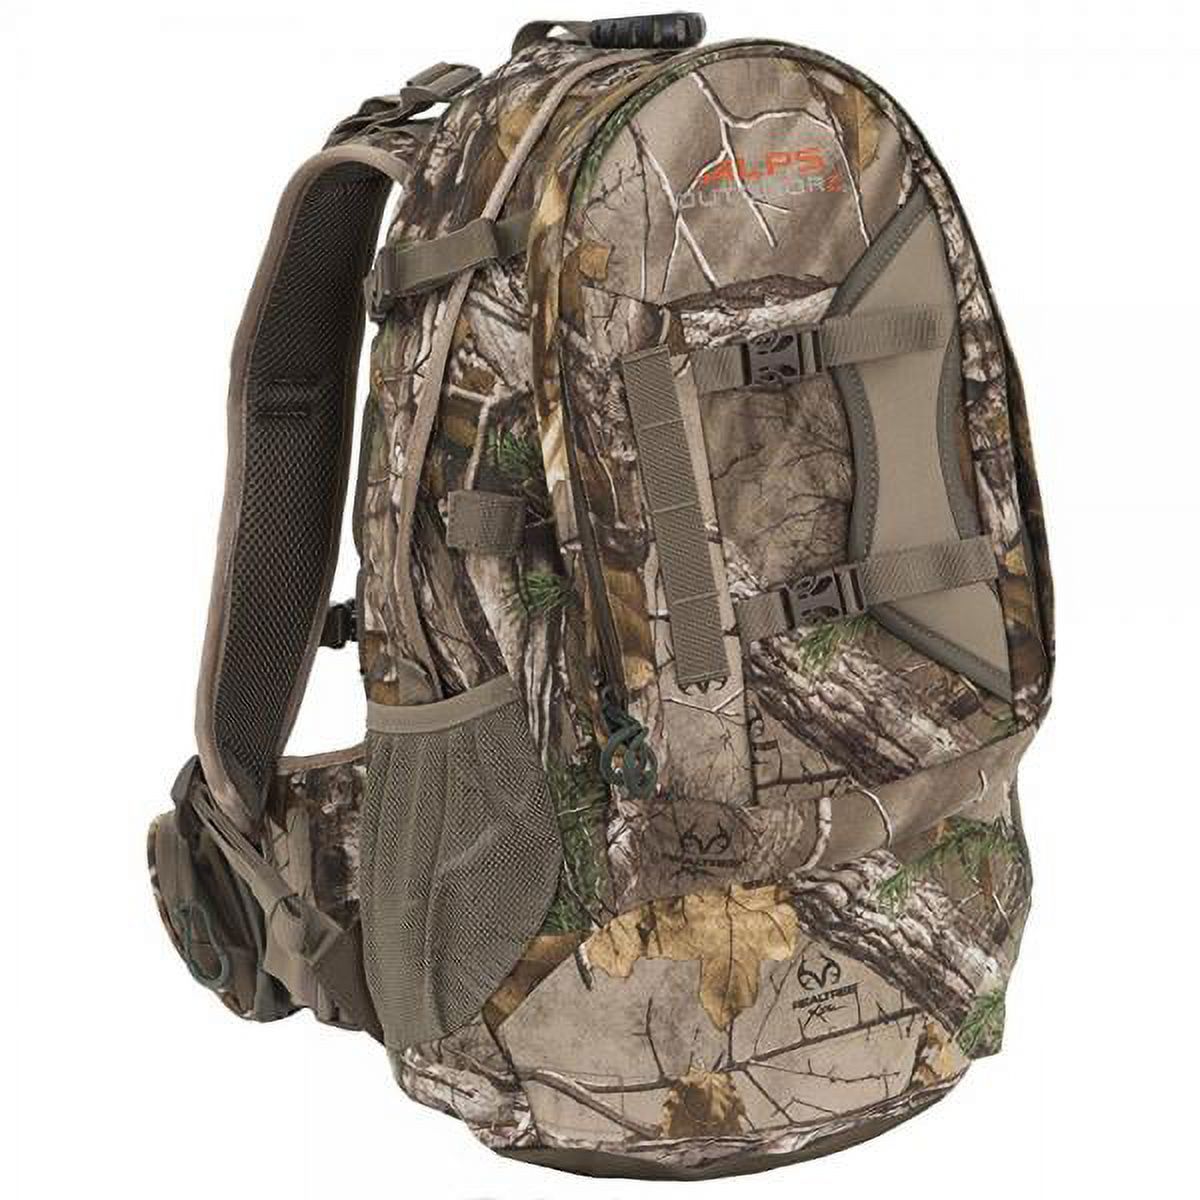 ALPS OutdoorZ Pursuit Hunting Pack - image 1 of 3